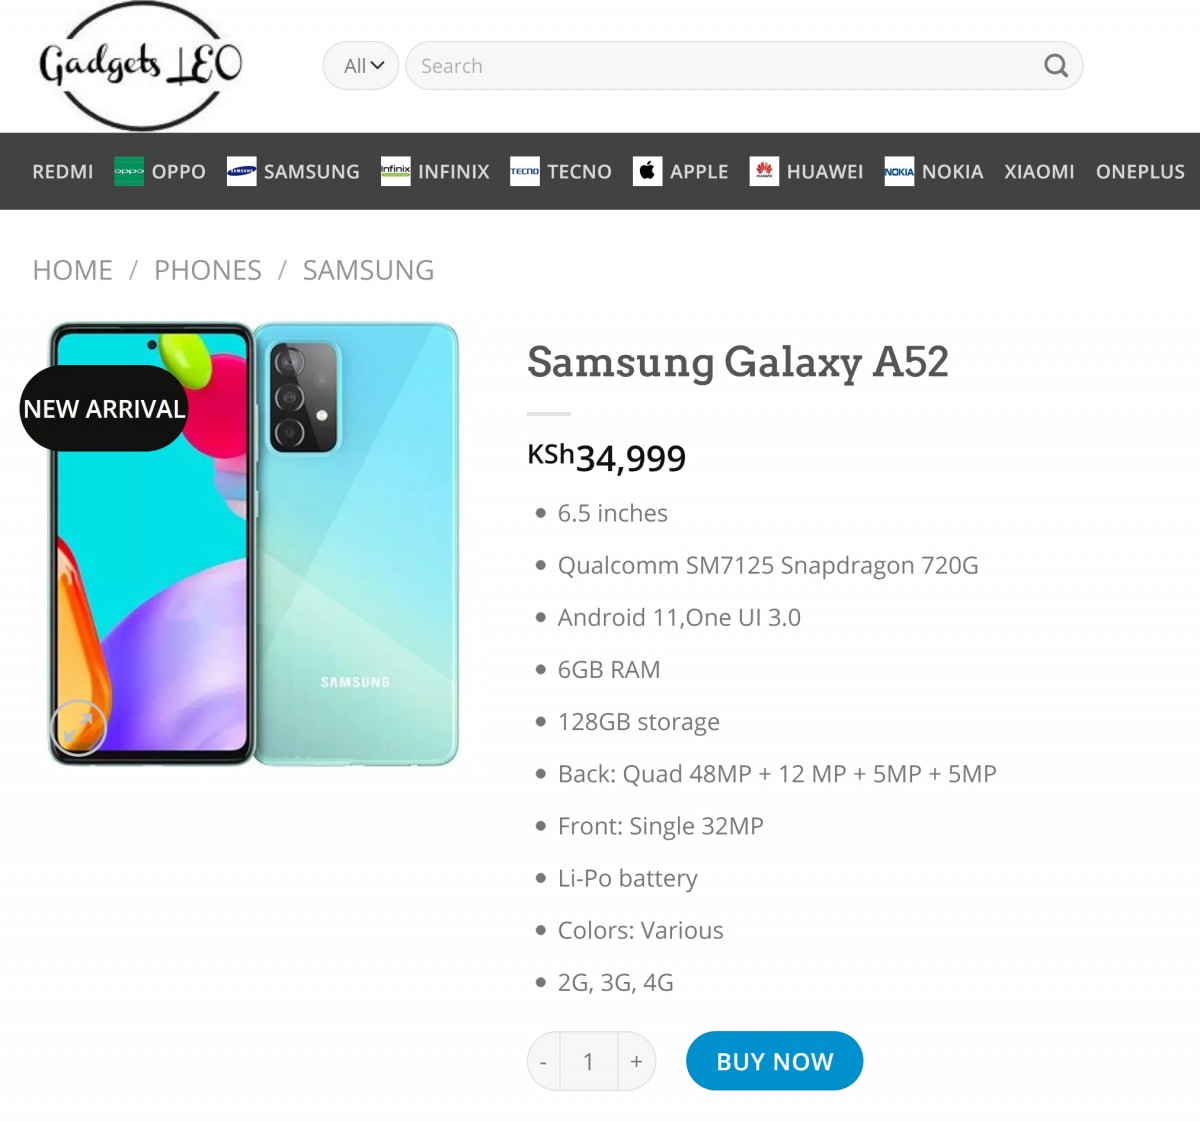 Unannounced Samsung Galaxy A52 appears in online store yet again, with price and ready to ship